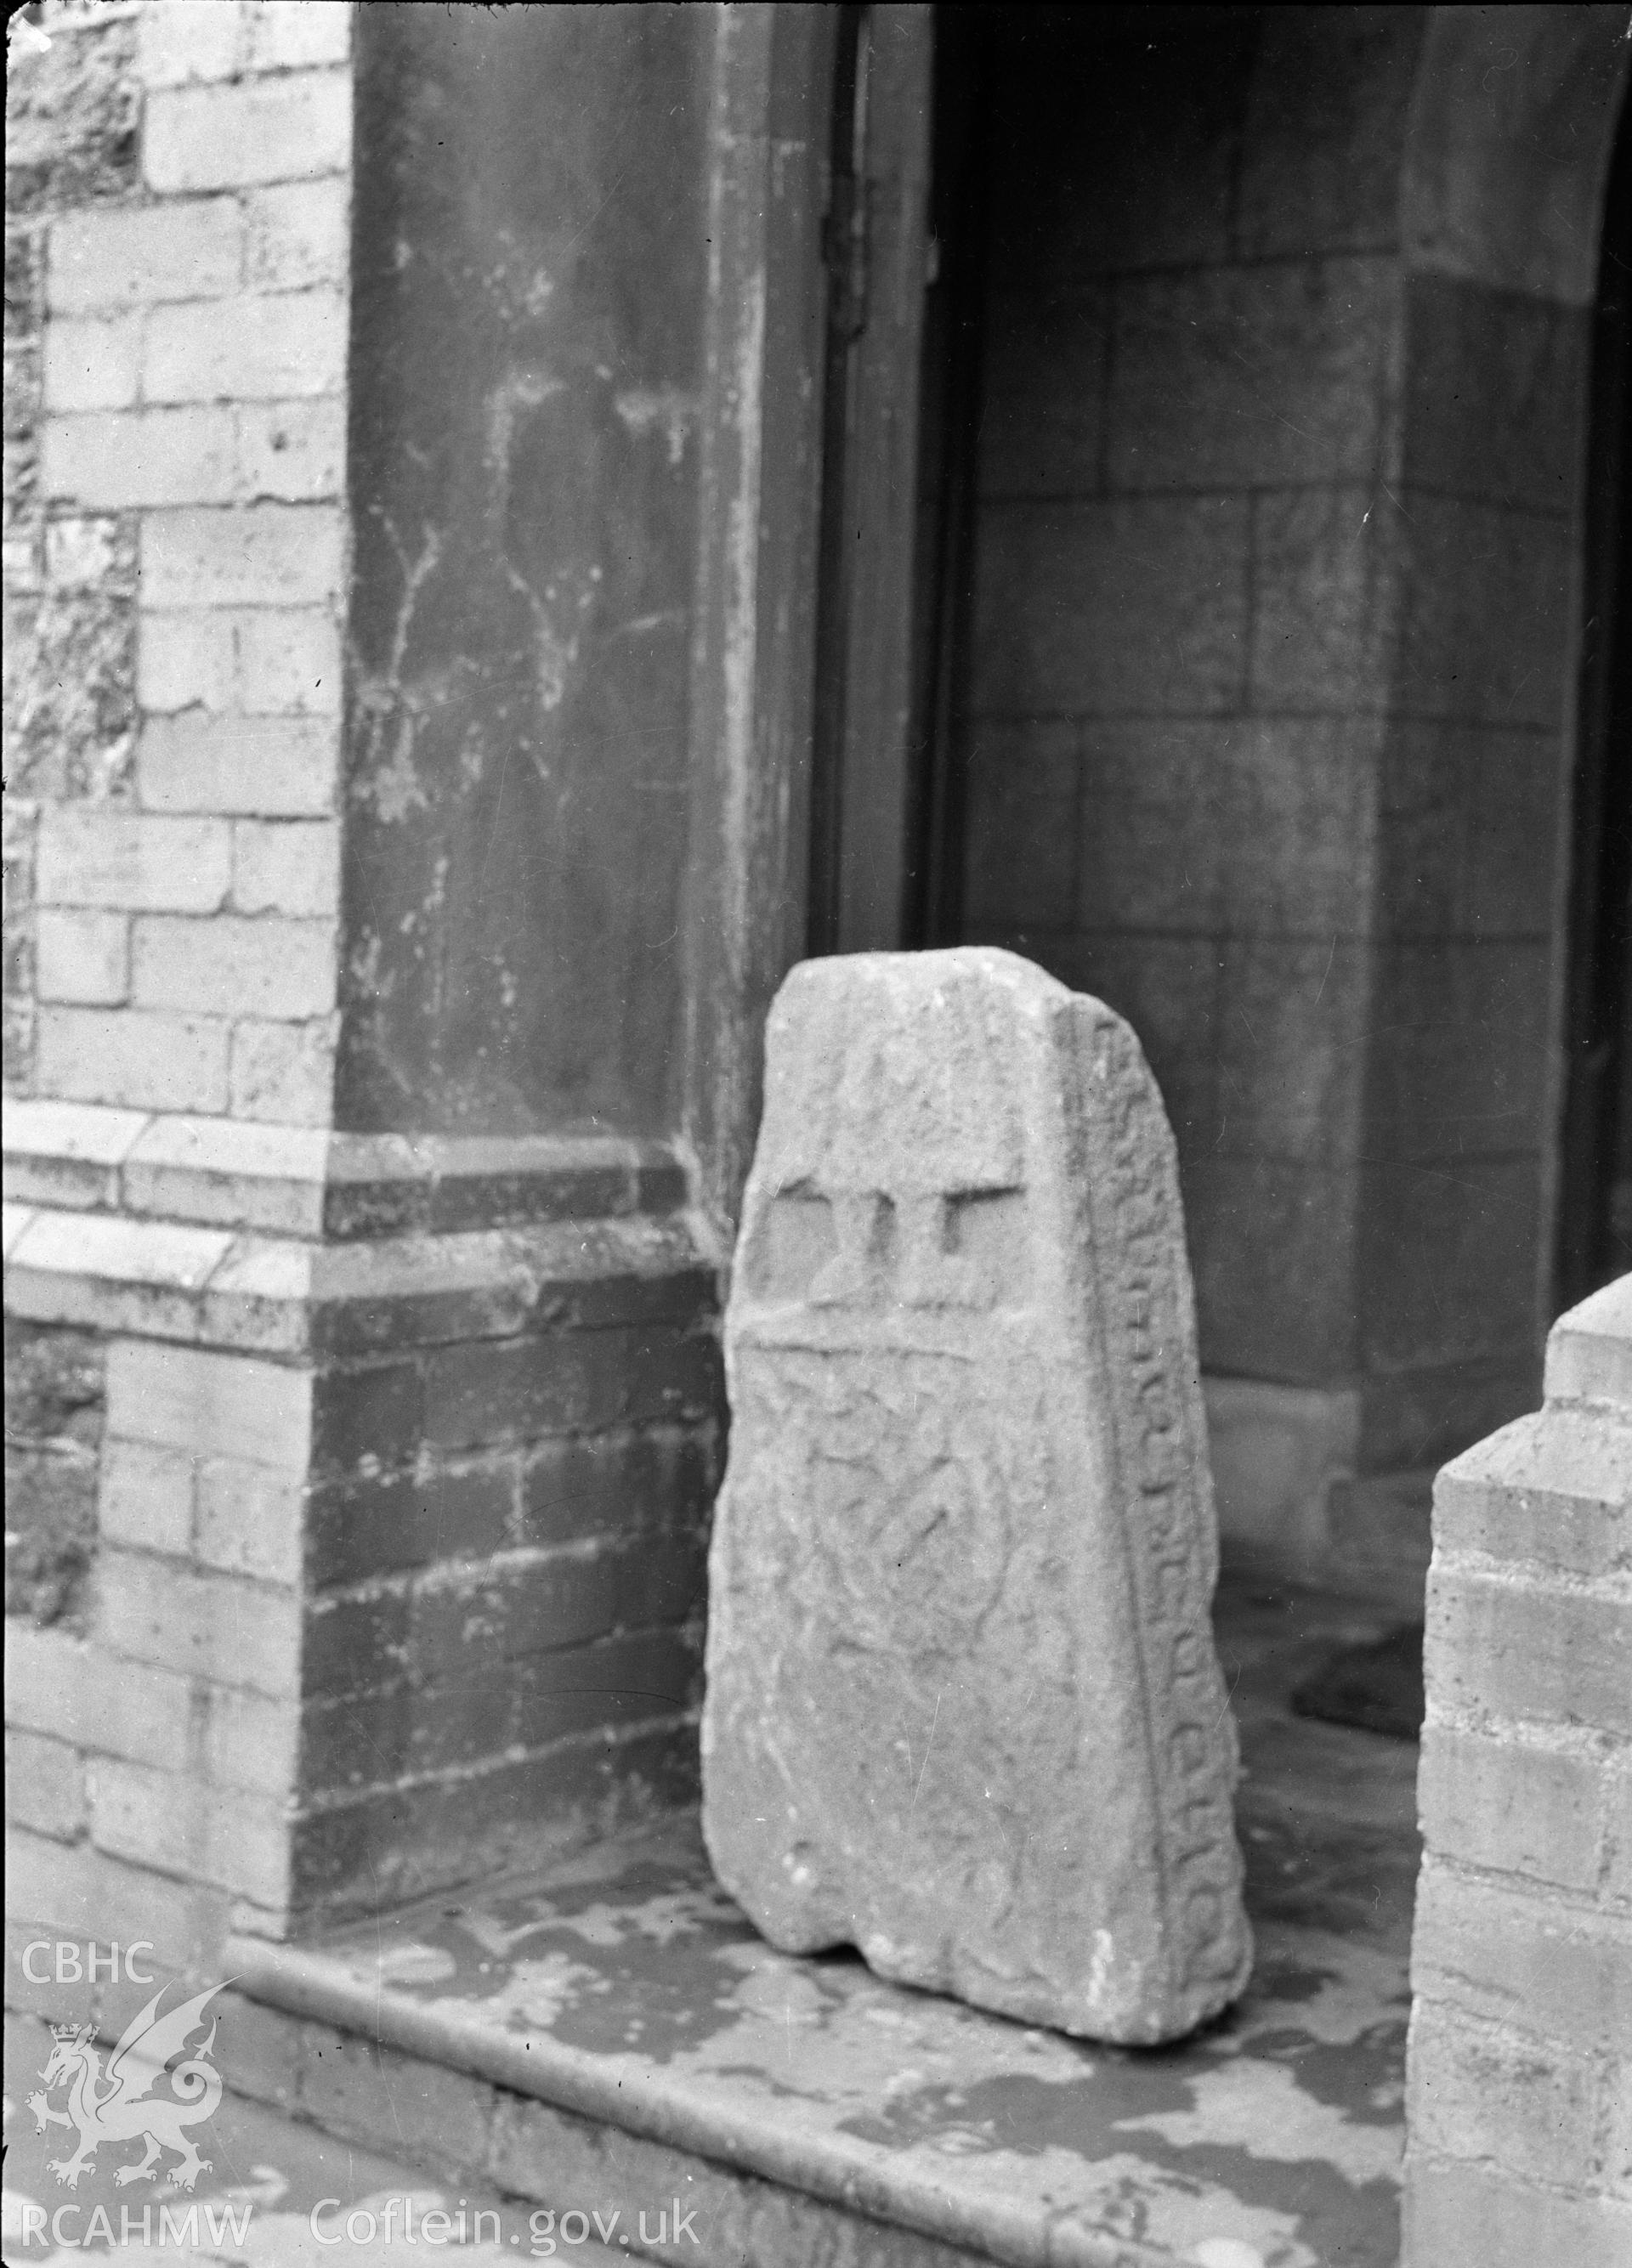 Digital copy of a nitrate negative showing an inscribed stone in the chapel on Bardsey Island. Transcript of reverse of black and white photograph: '57 x 6 / Caernarvon.' From the Cadw Monuments in Care Collection.